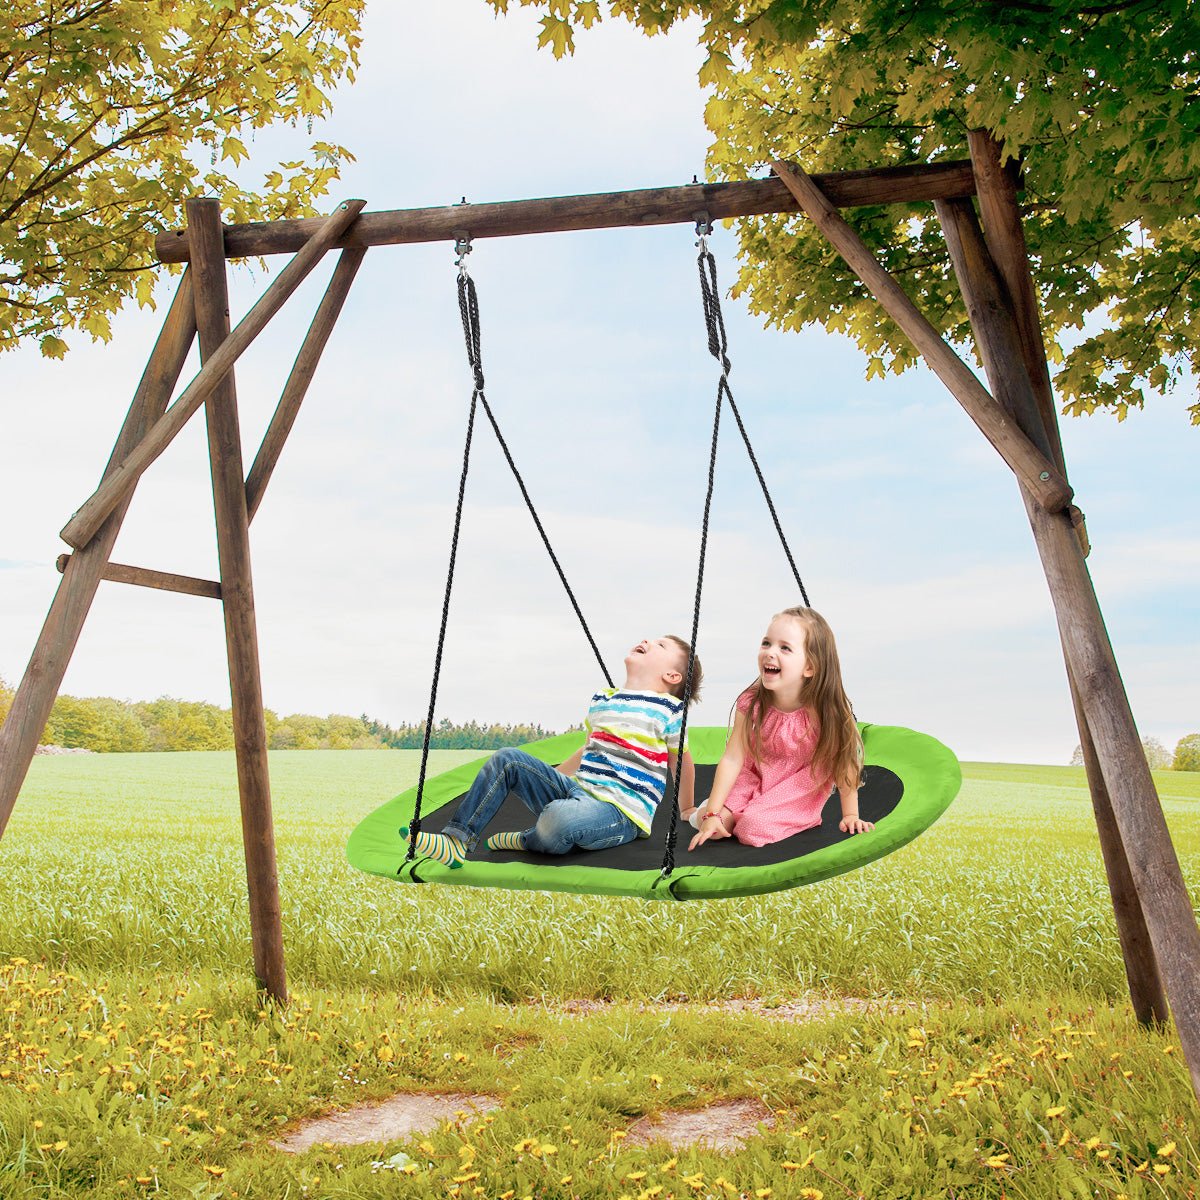 Outdoor Oval Swing Set: Fly High with Adjustable Hanging Ropes